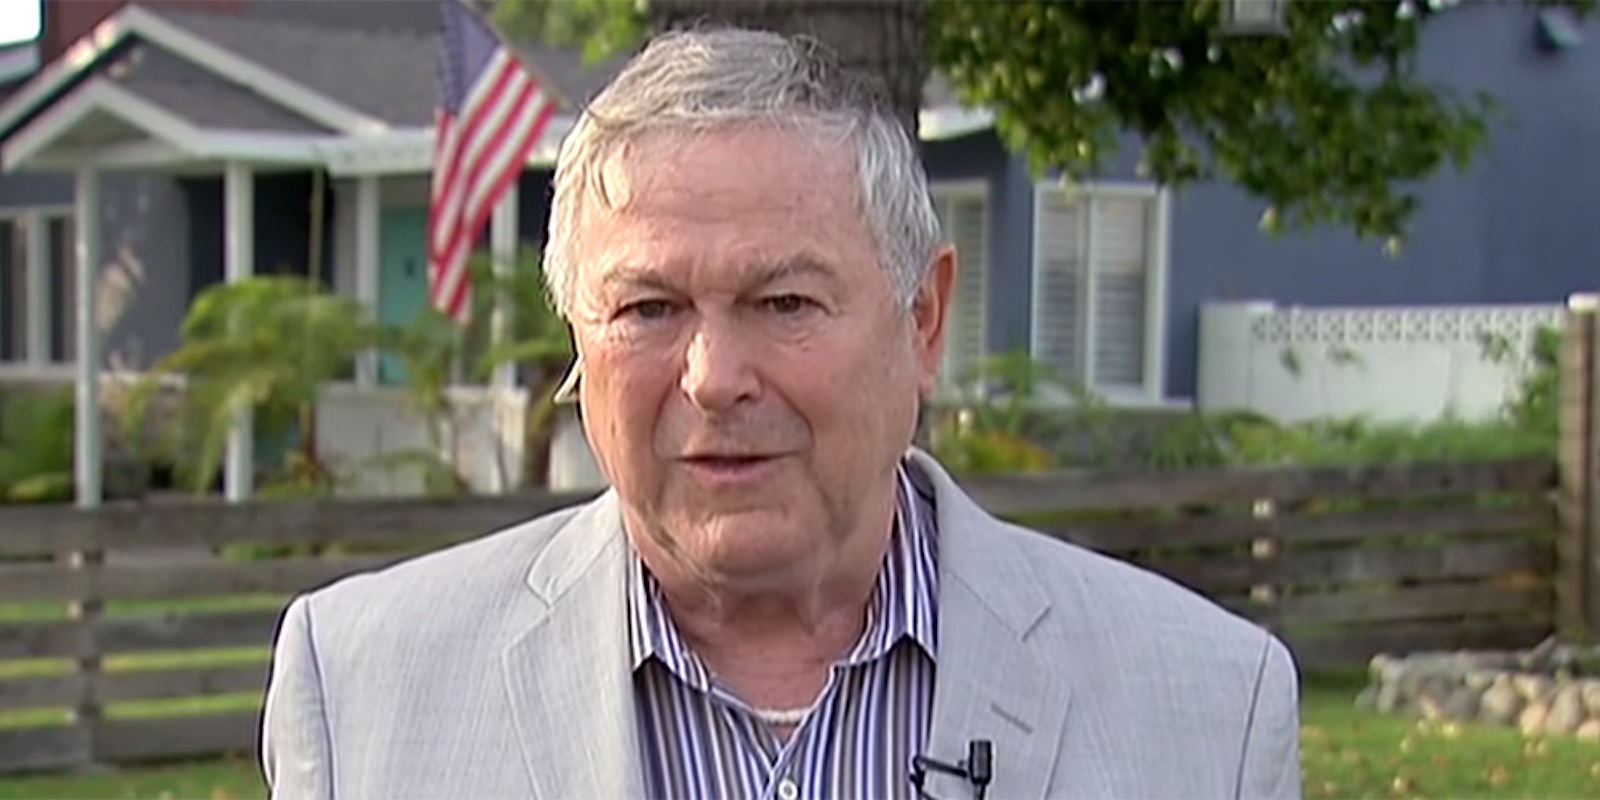 GOP Congressman Dana Rohrabacher said without providing evidence that the YouTube shooter 'could be' an 'illegal immigrant.'